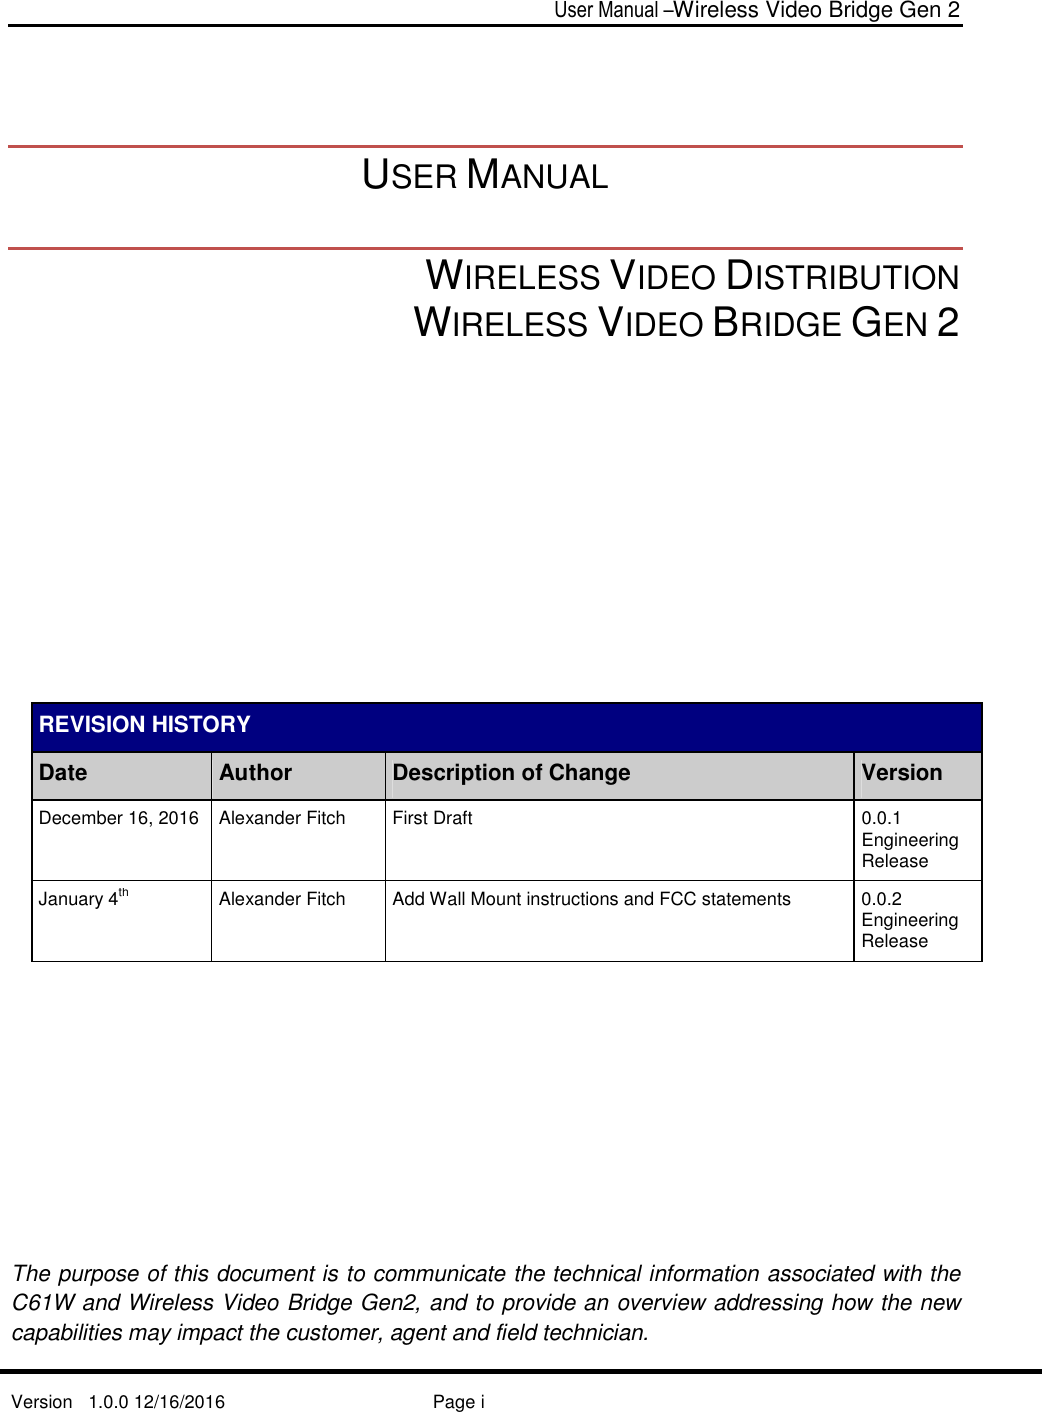  User Manual –Wireless Video Bridge Gen 2  Version   1.0.0 12/16/2016     Page i     USER MANUAL  WIRELESS VIDEO DISTRIBUTION  WIRELESS VIDEO BRIDGE GEN 2              REVISION HISTORY Date Author Description of Change Version December 16, 2016 Alexander Fitch  First Draft  0.0.1 Engineering Release January 4th   Alexander Fitch  Add Wall Mount instructions and FCC statements  0.0.2 Engineering Release       The purpose of this document is to communicate the technical information associated with the C61W and Wireless Video Bridge Gen2, and to provide an overview addressing how the new capabilities may impact the customer, agent and field technician. 